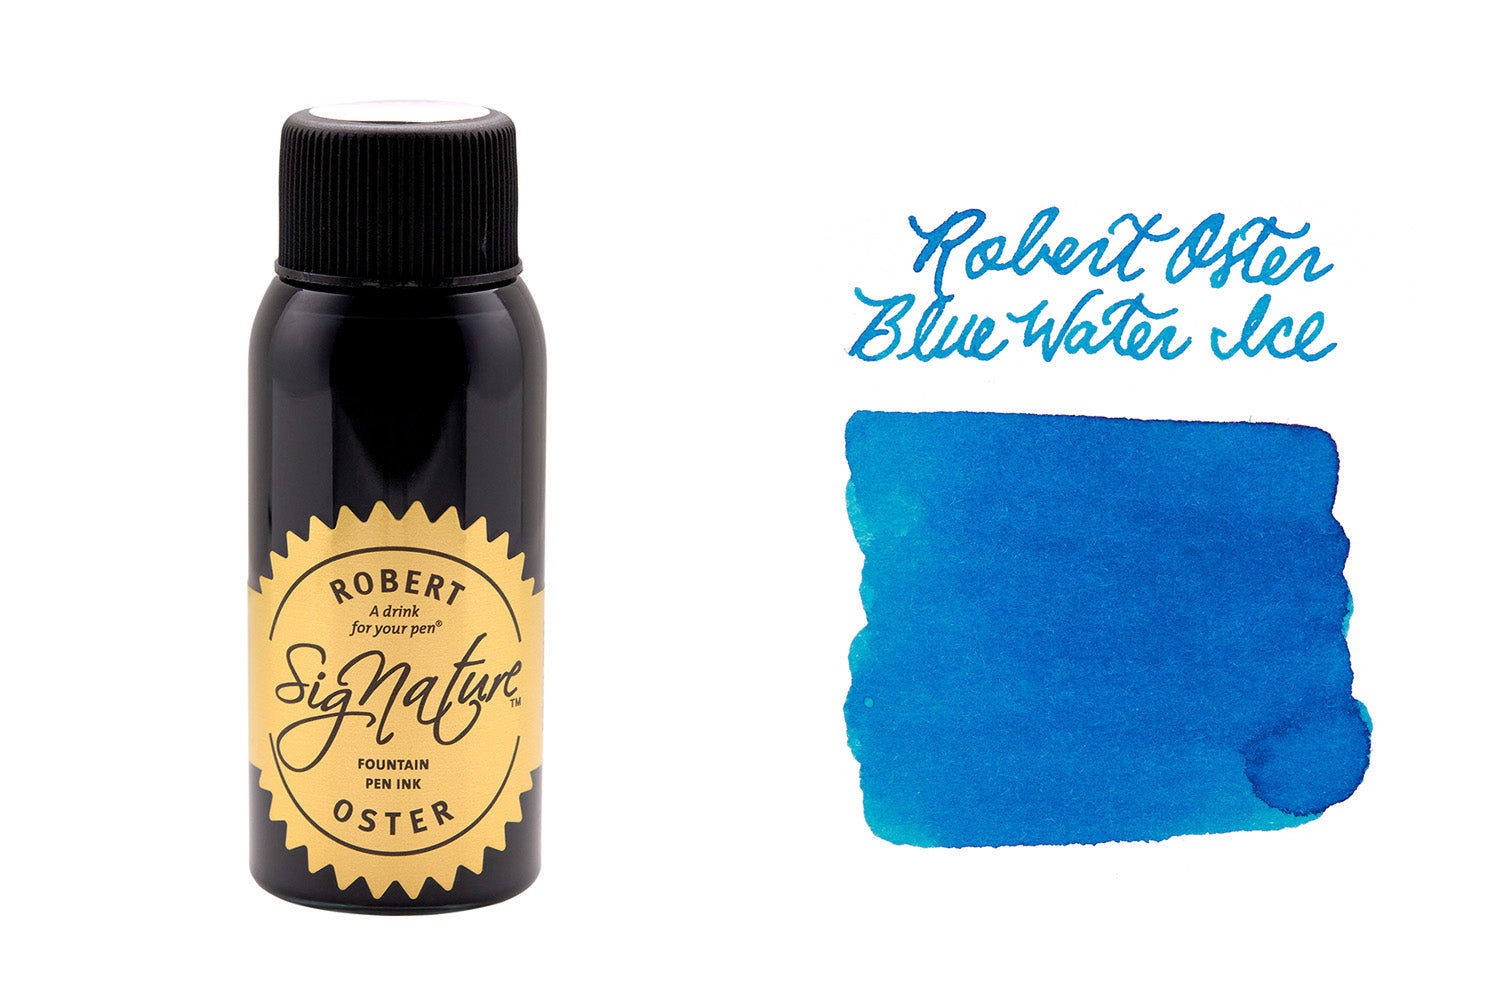 Robert Oster Blue Water Ice Fountain Pen Ink bottle and swab on white background